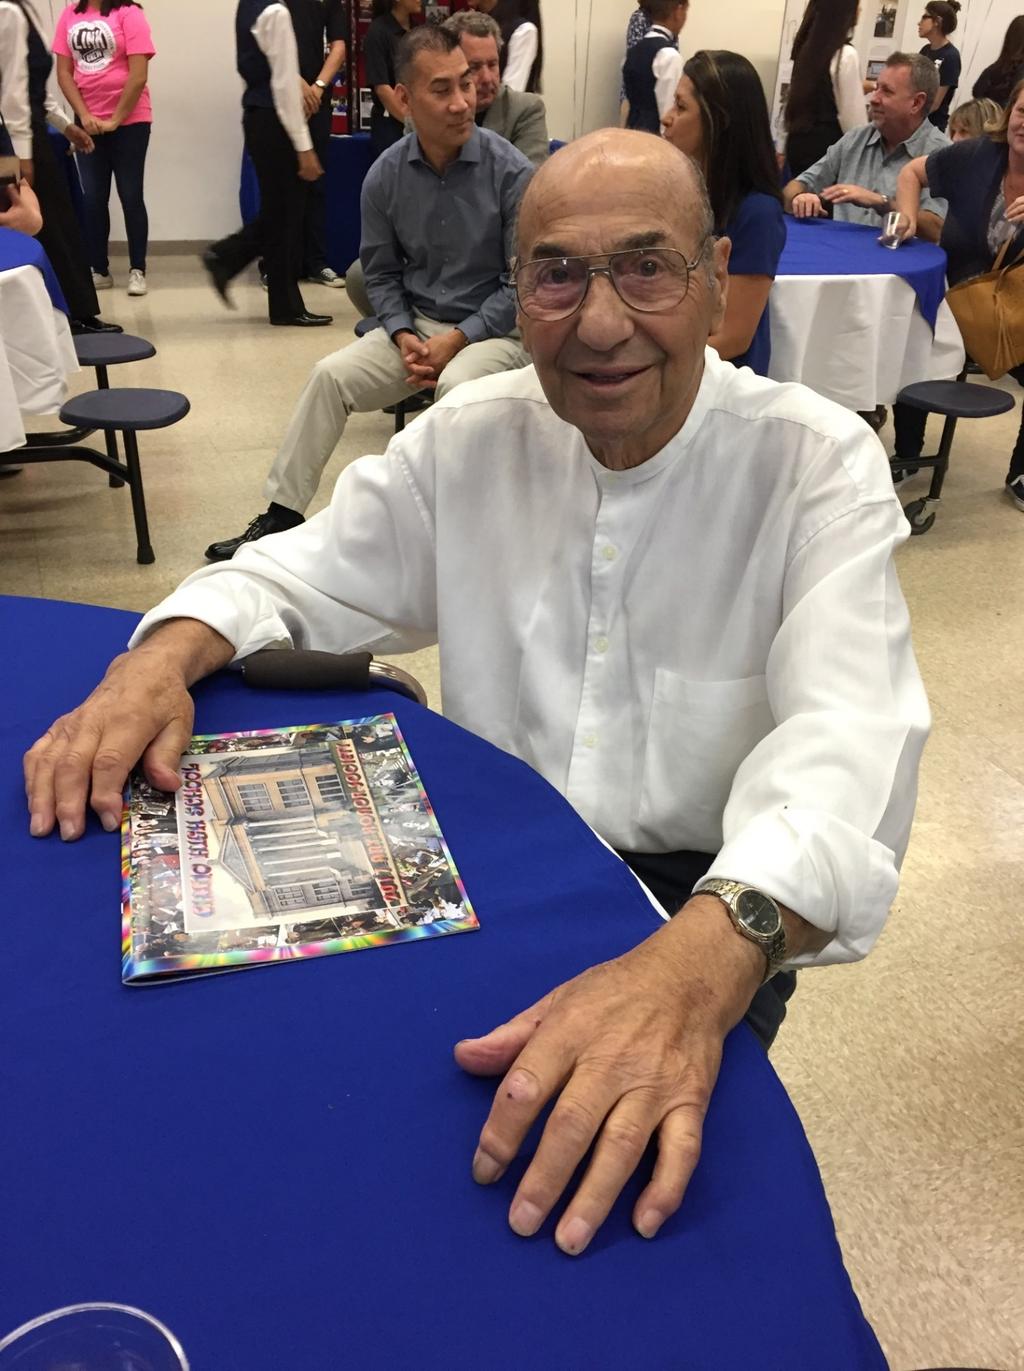 Dave George, a 1950 graduate of Chino High, is one of the guests of